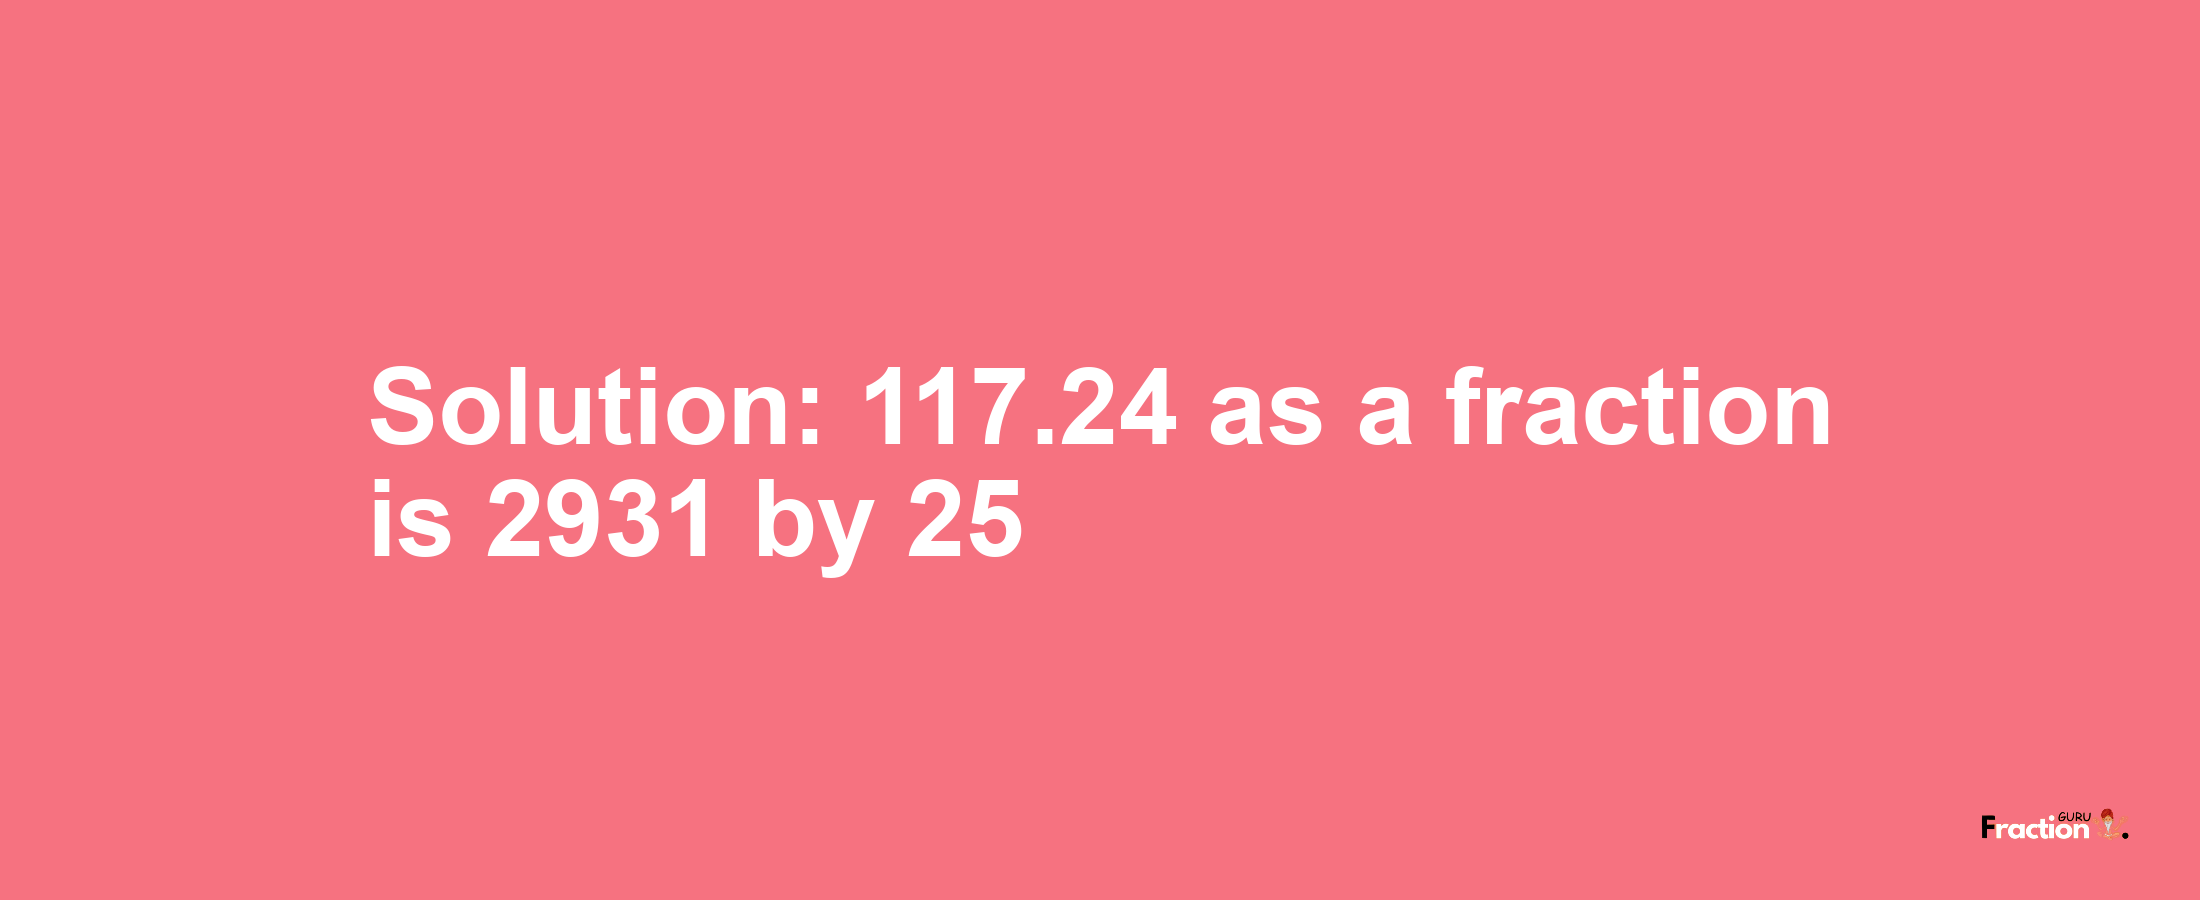 Solution:117.24 as a fraction is 2931/25